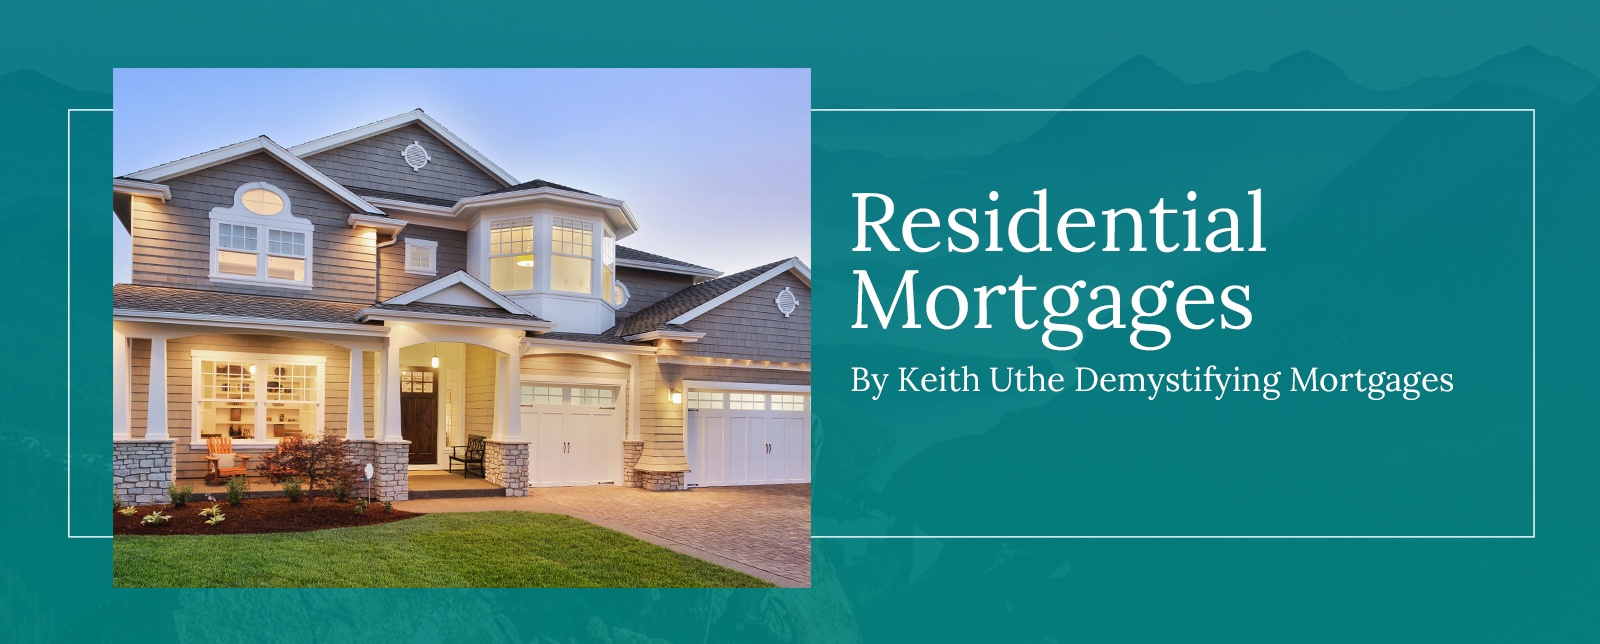 Keith Uthe Demystifying Mortgages - Residential Mortgage Services in Calgary, Edmonton, AB